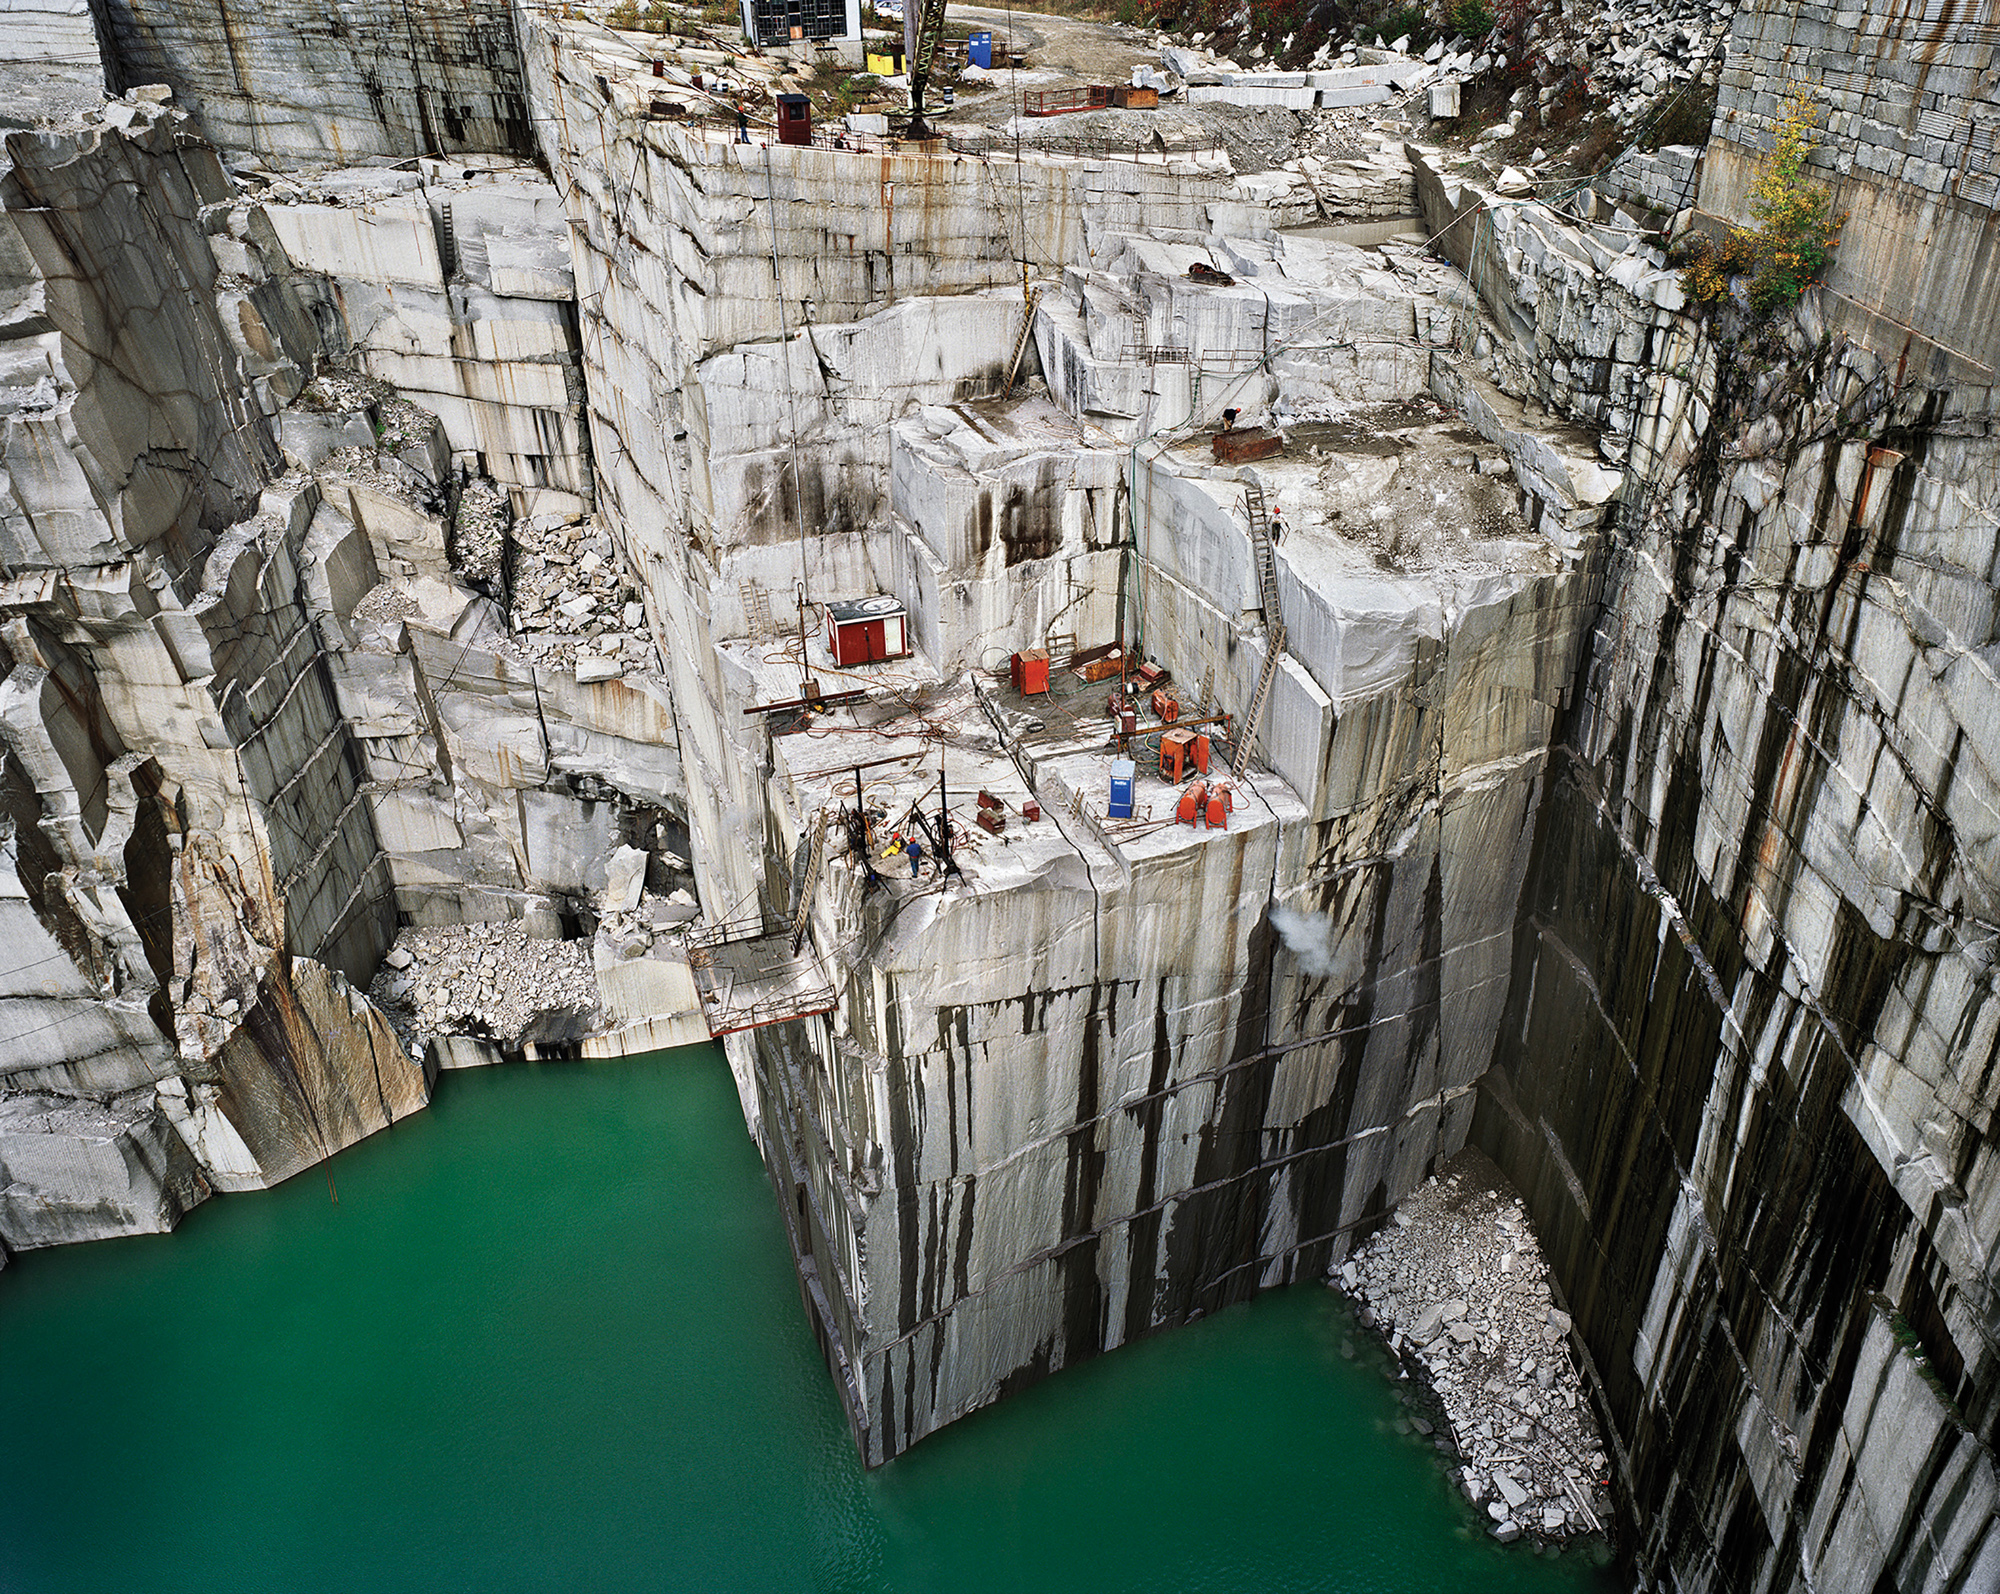 Edward Burtynsky’s photo, "Rock of Ages #7," was taken at the E.L...